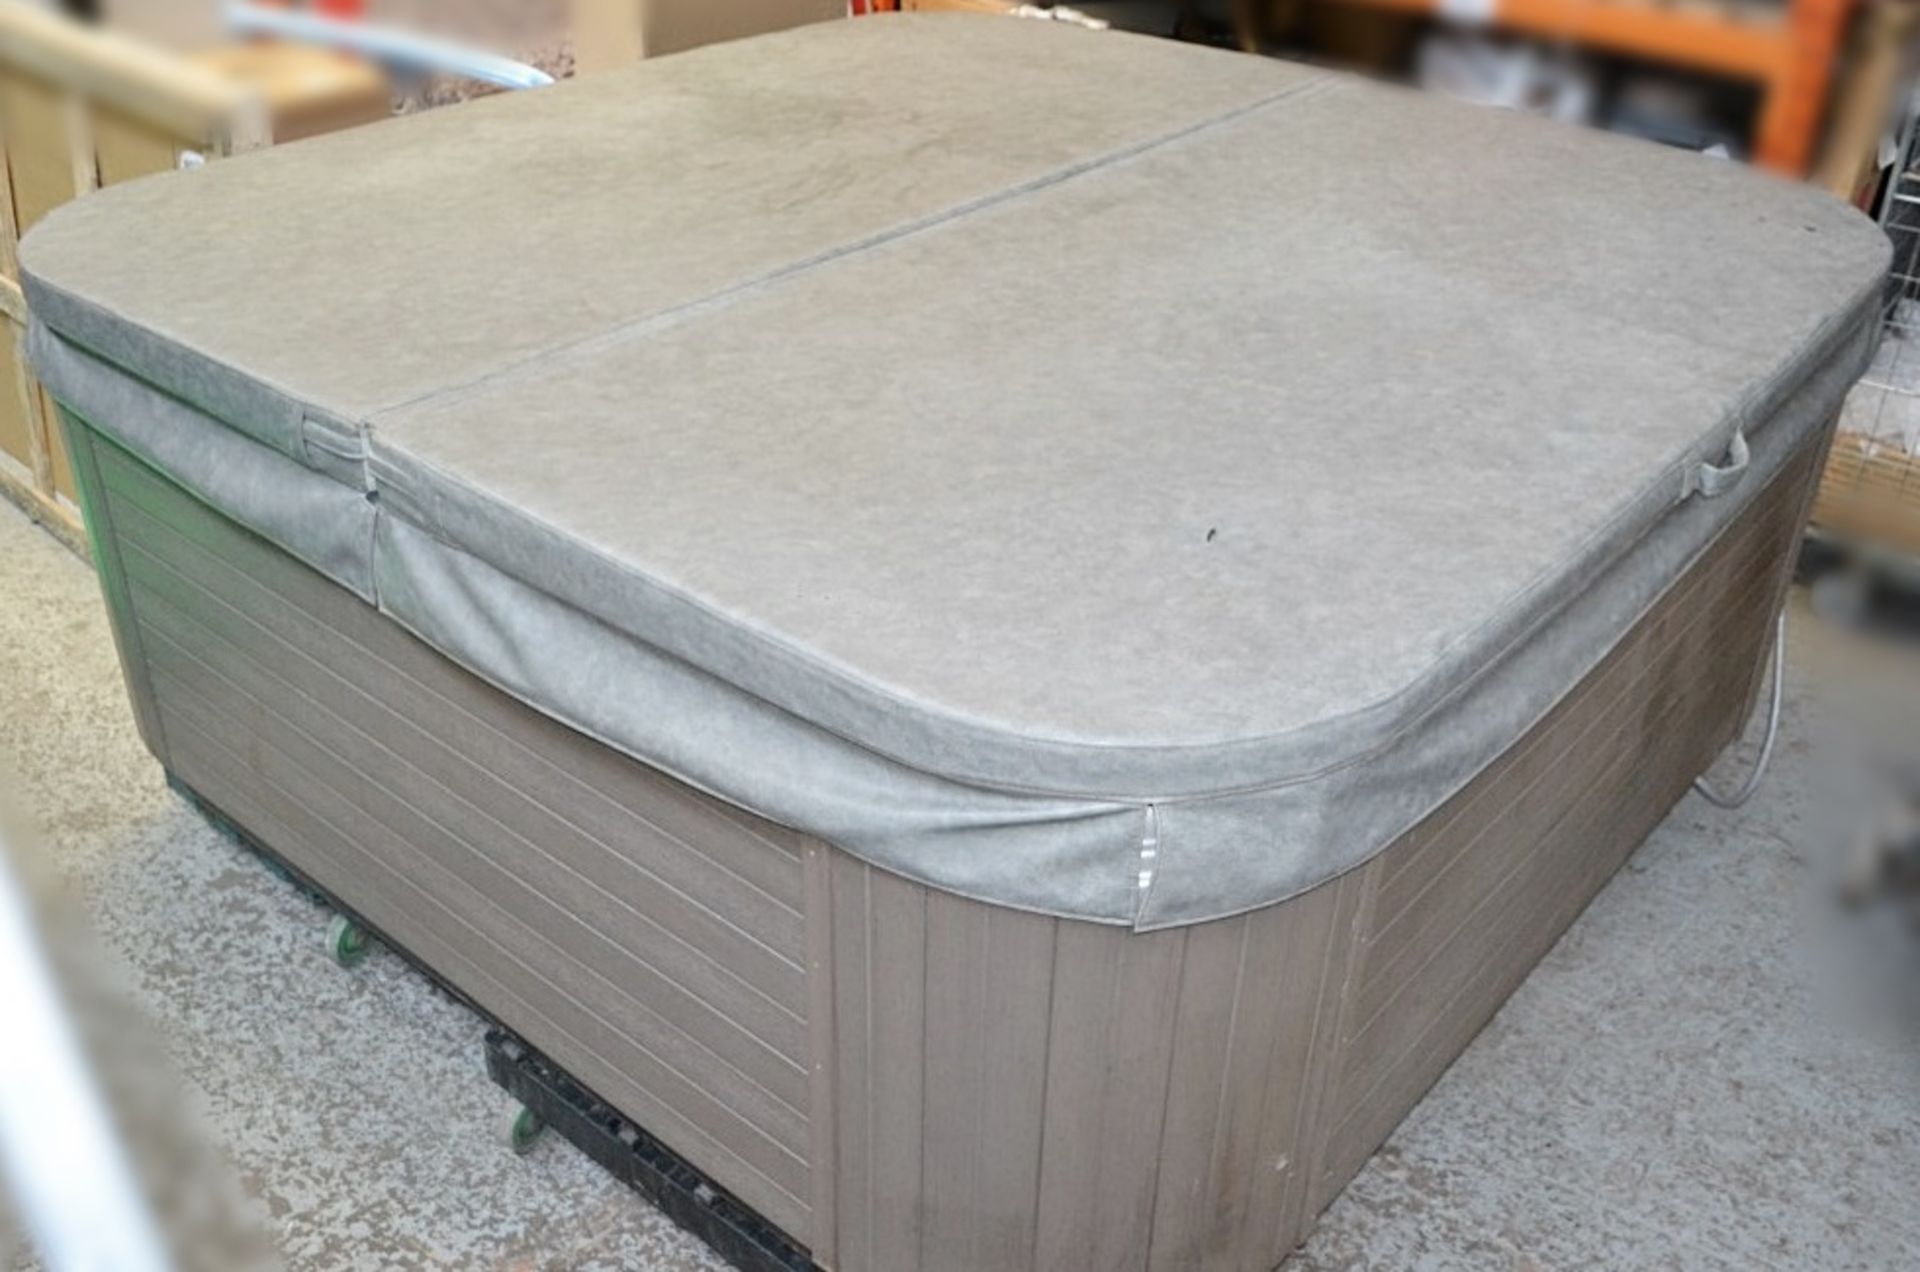 1 x Villeroy & Boch 6-Seater Hot Tub - Used In Good Working Condition - 2.4 Metres - Image 13 of 29